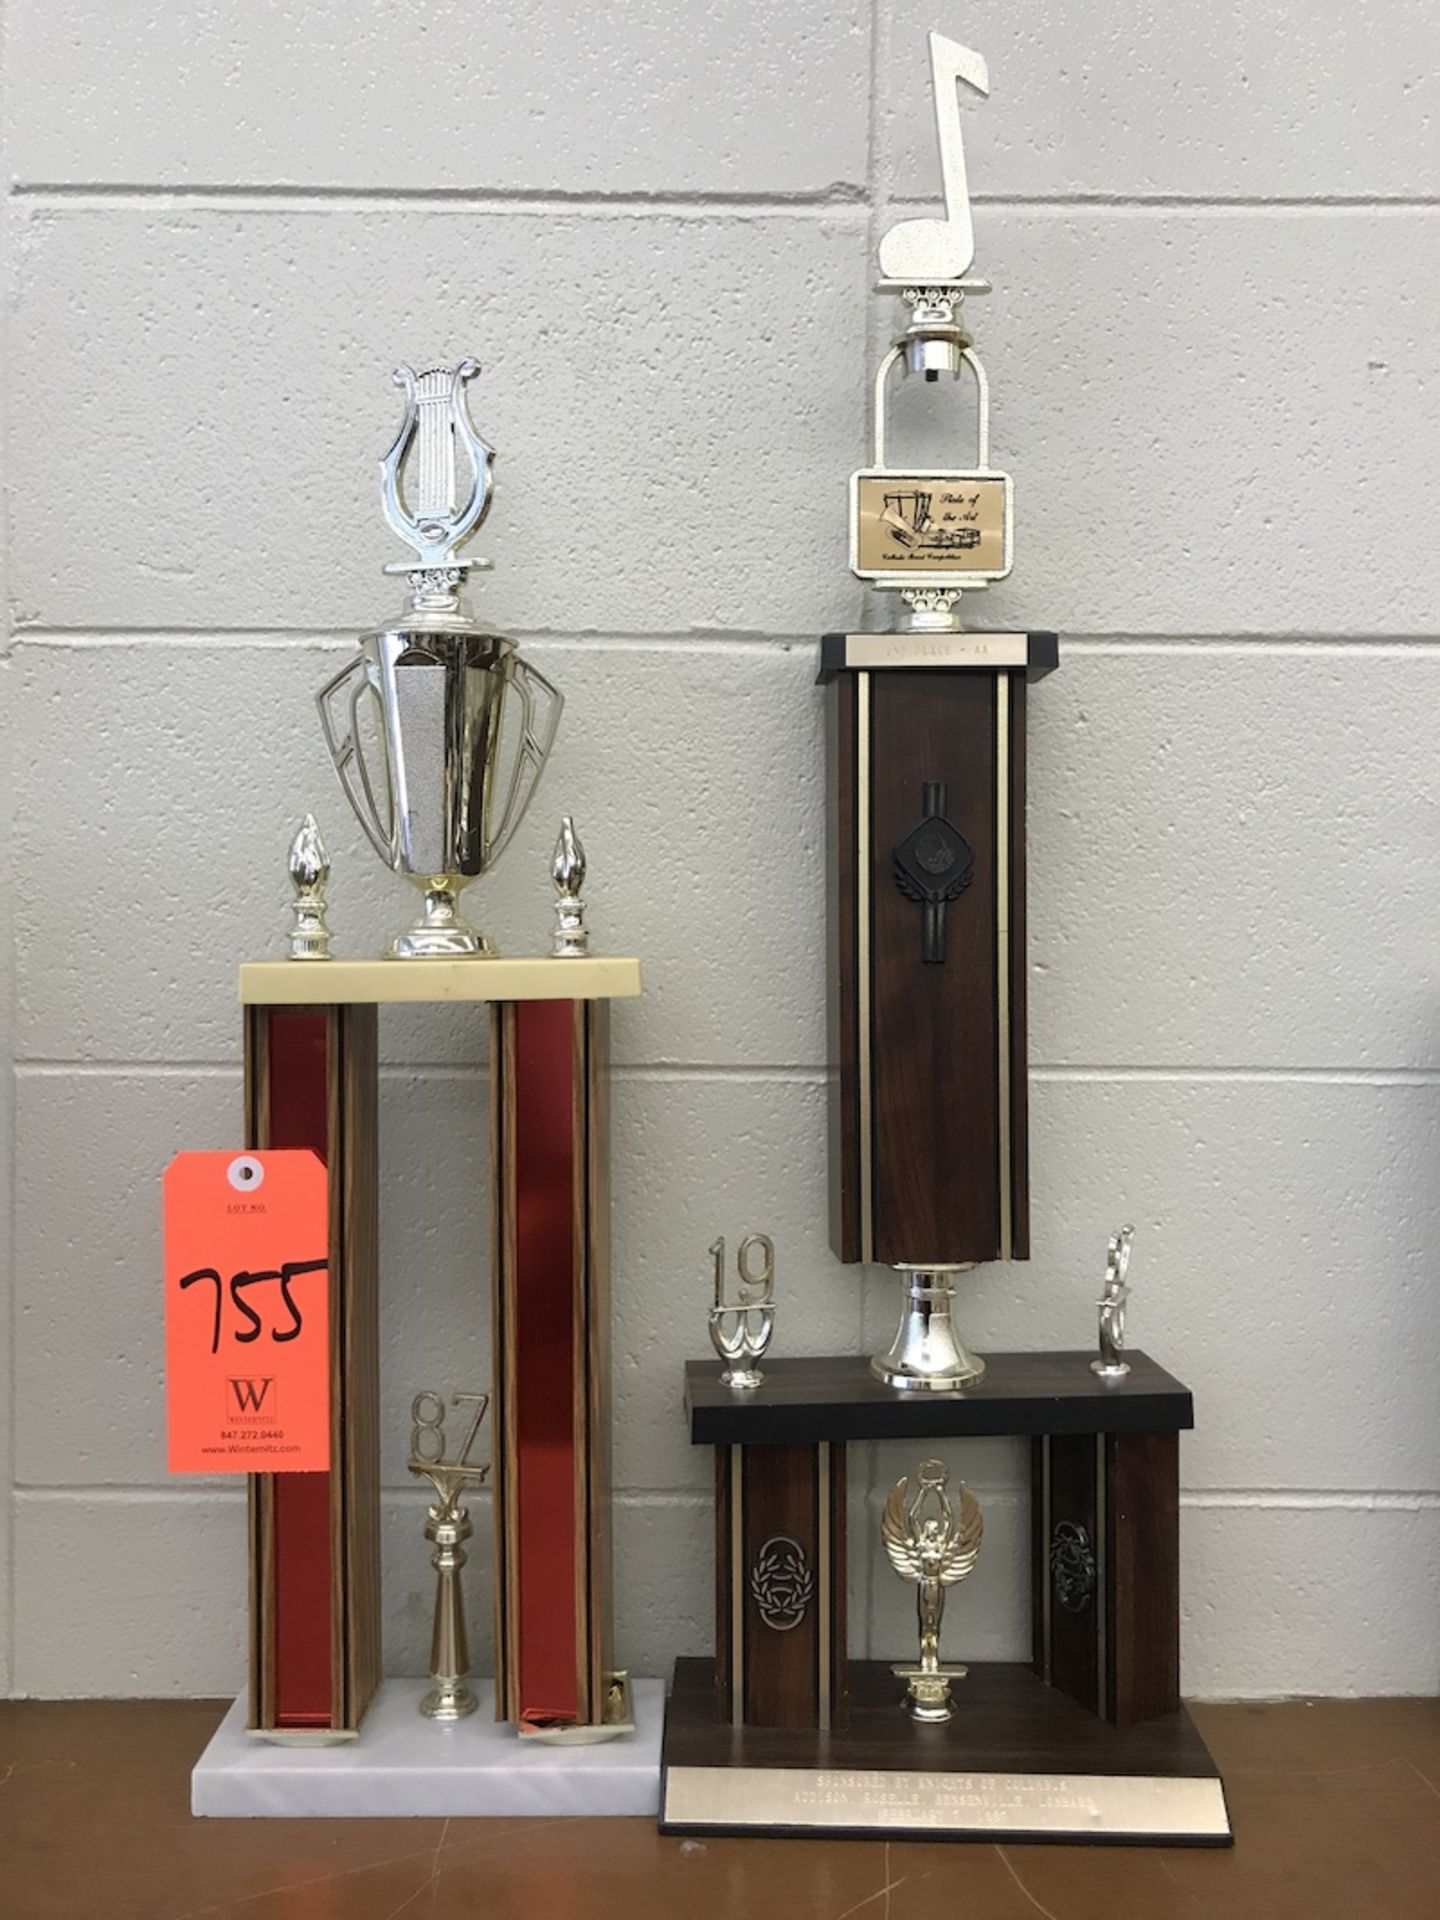 Lot - (1) 1987 Band Trophy (1) 1987Knights of Columbus Addison, Roselle, Bensenville, Lombard Trophy